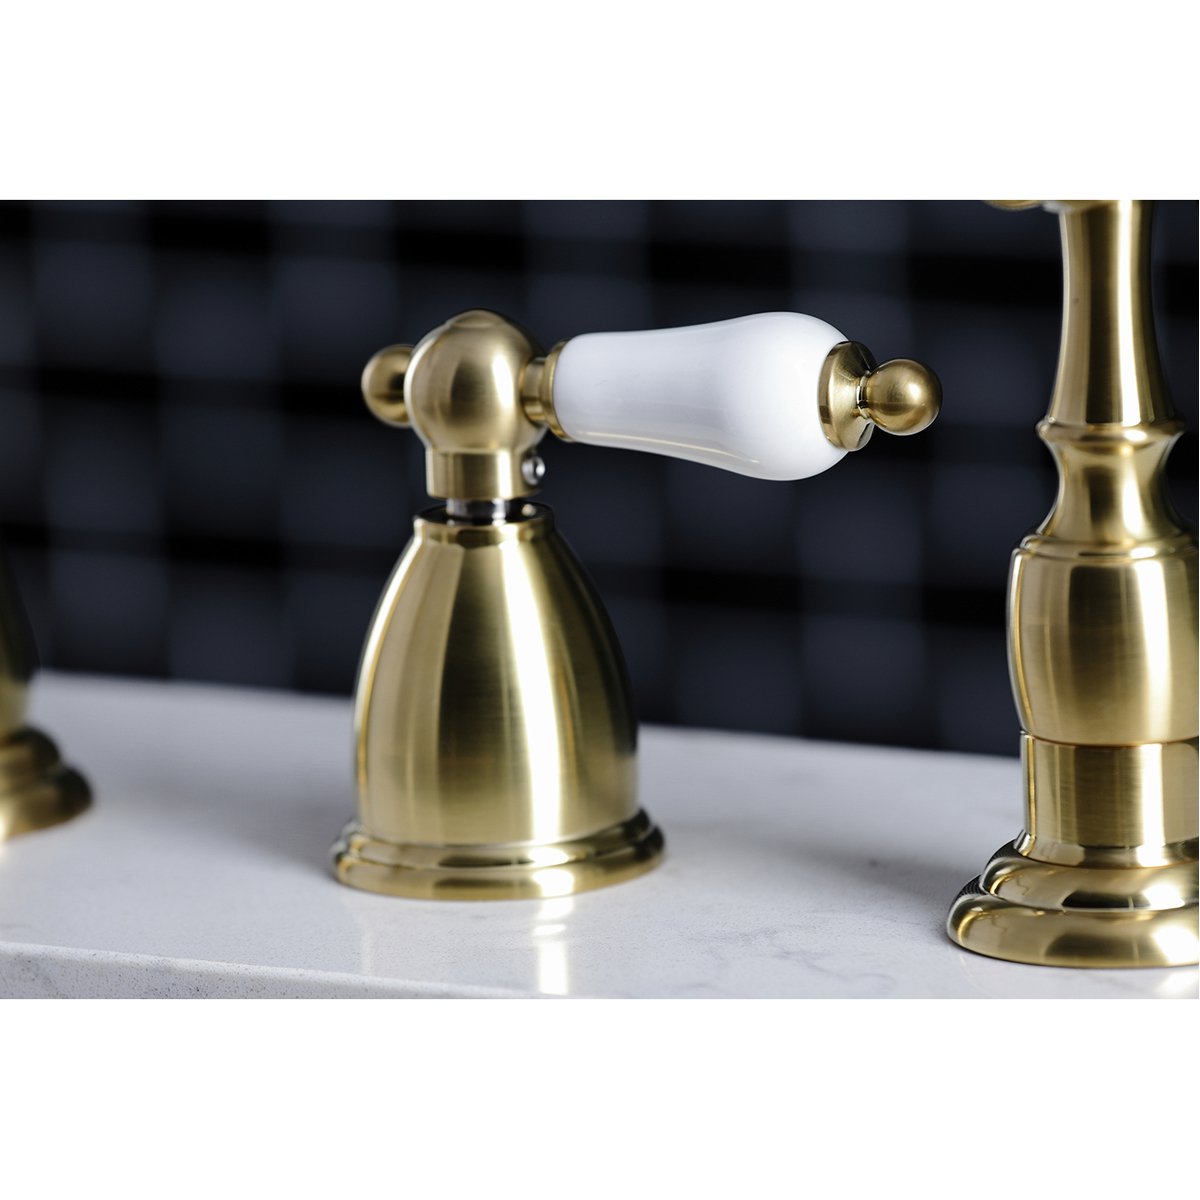 Widespead 4-hole Solid Brass Kitchen Faucet Oil Rubbed Bronze - Kingston  Brass : Target